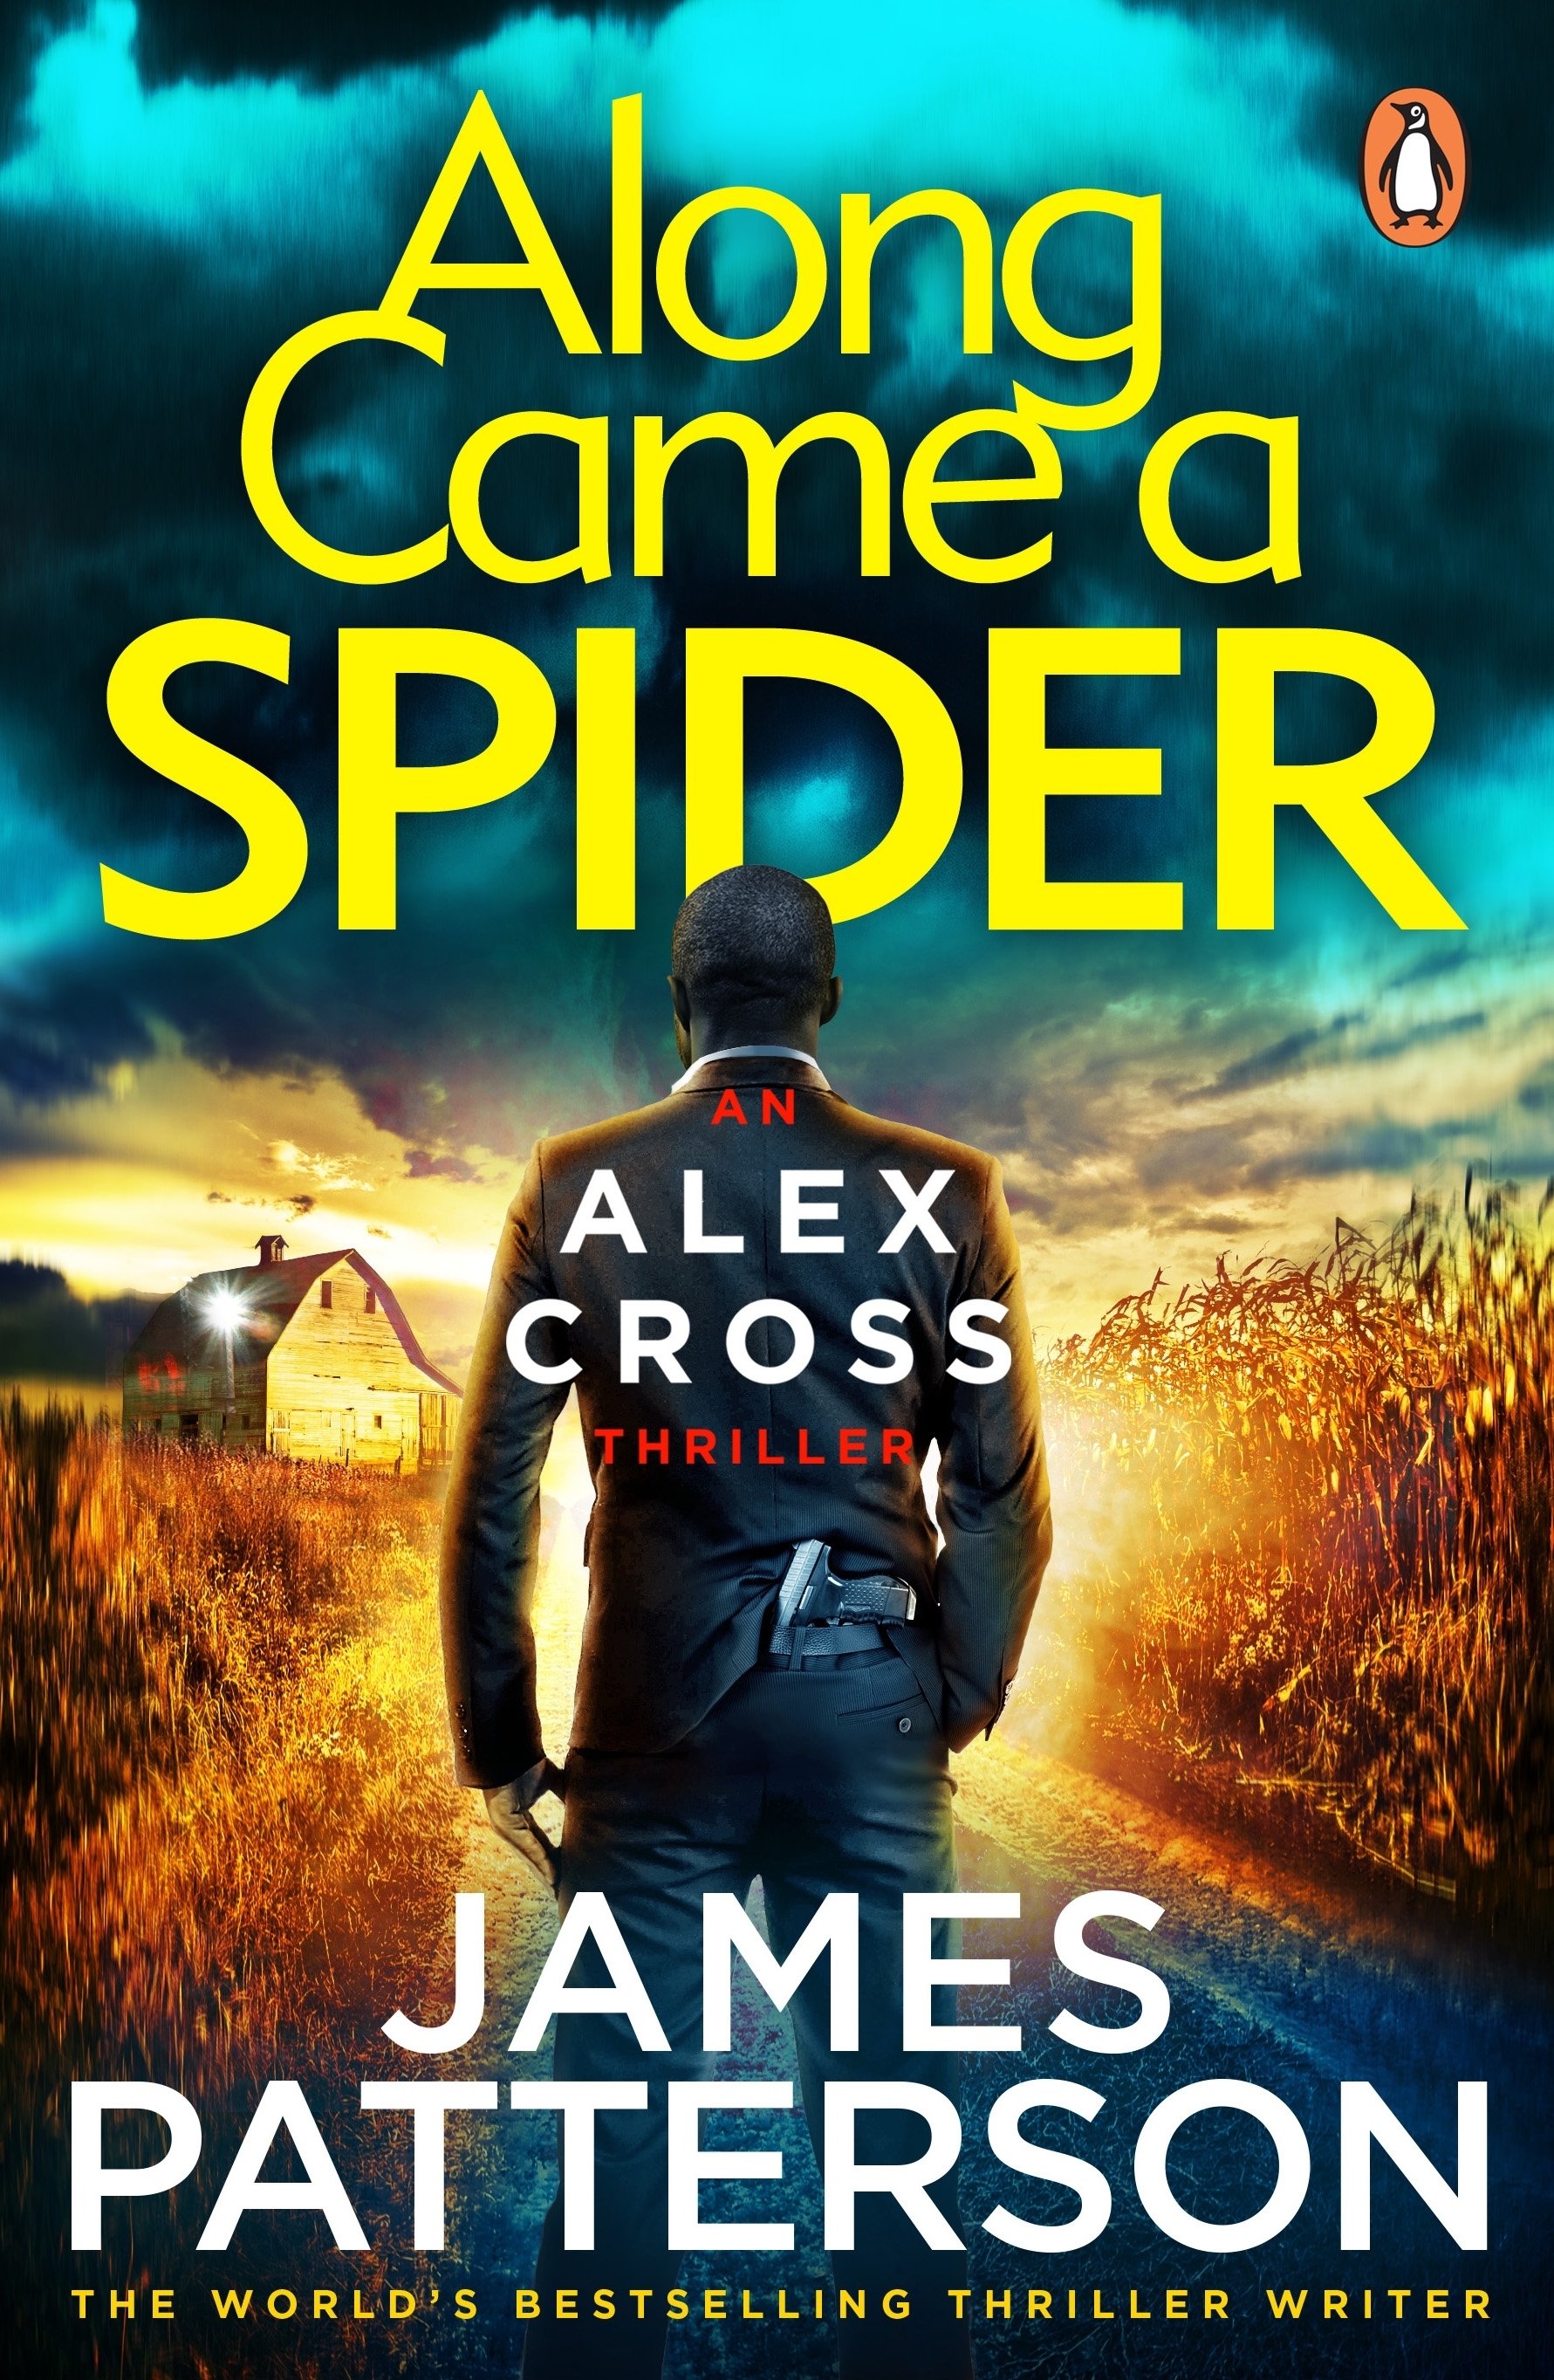 james patterson along came a spider series in order